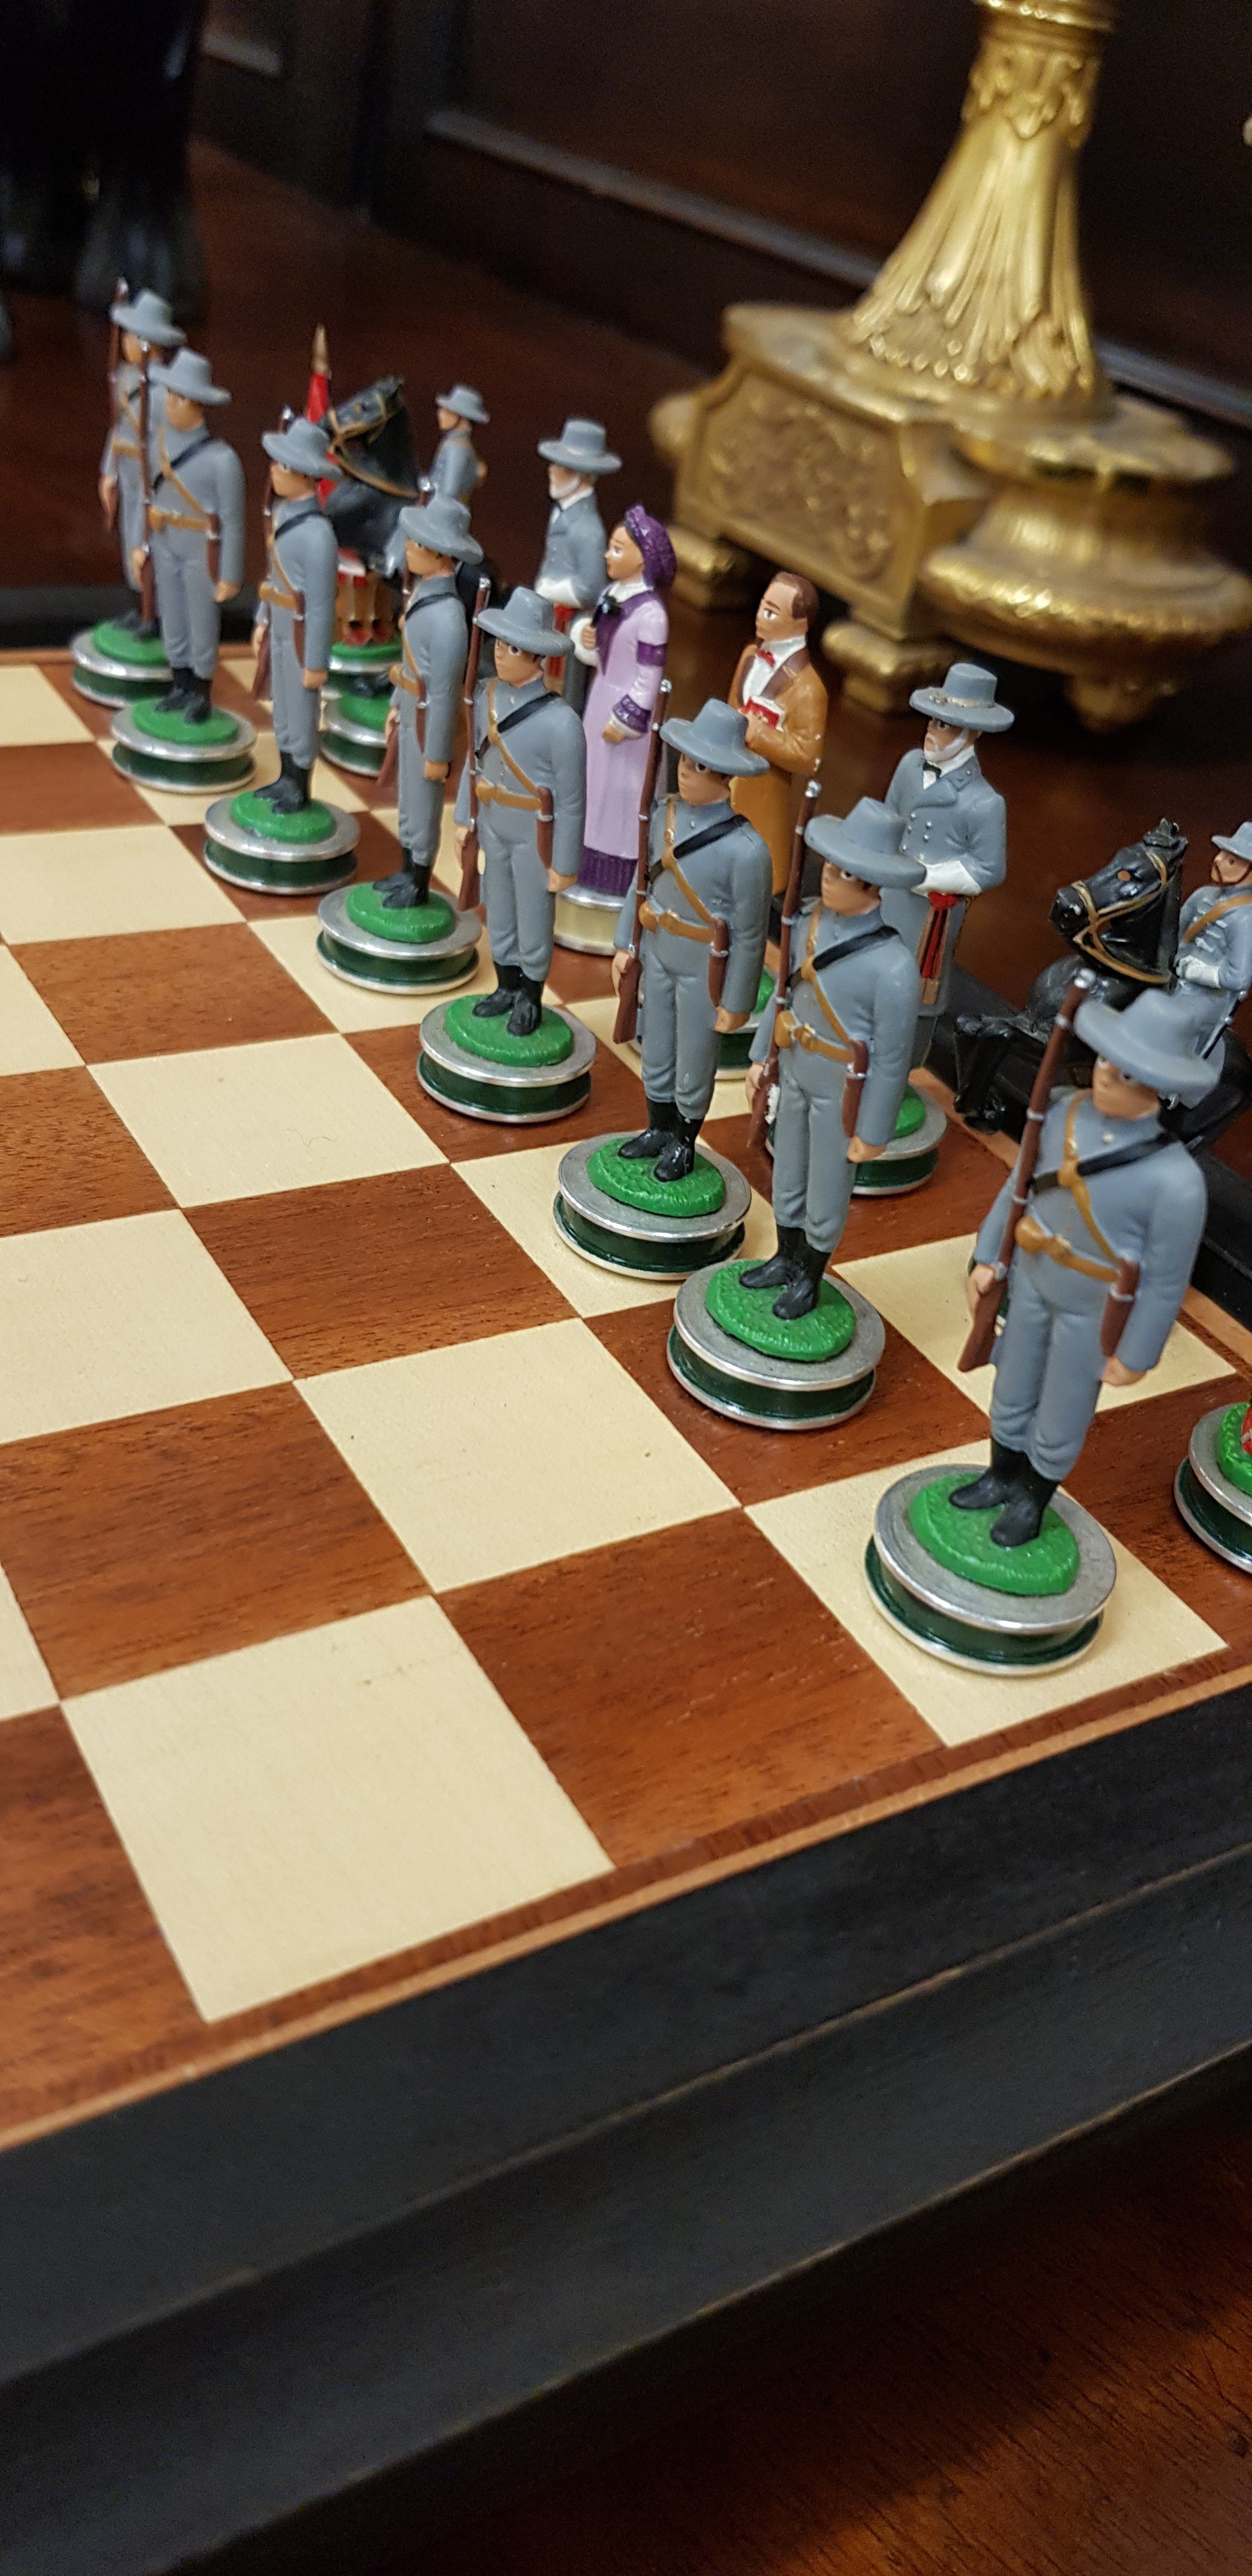 A cased American Civil War Chess Set, hand painted figures, including Abraham Lincoln and others, - Image 3 of 5